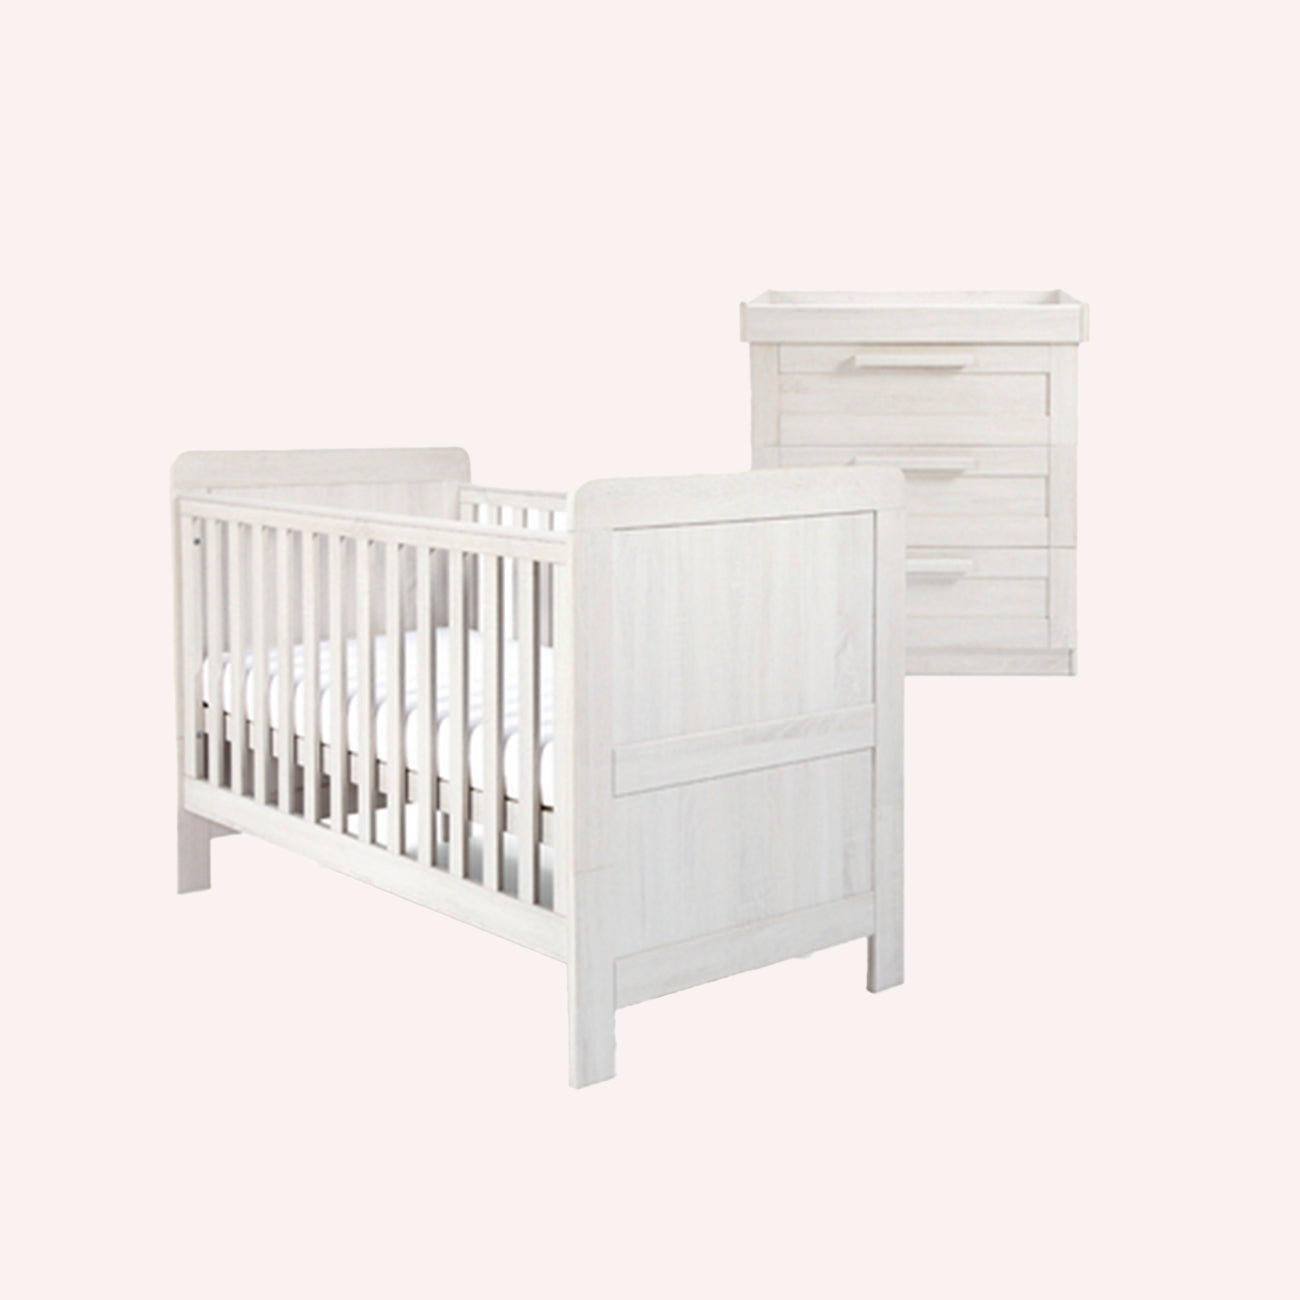 Atlas Cot Bed - White